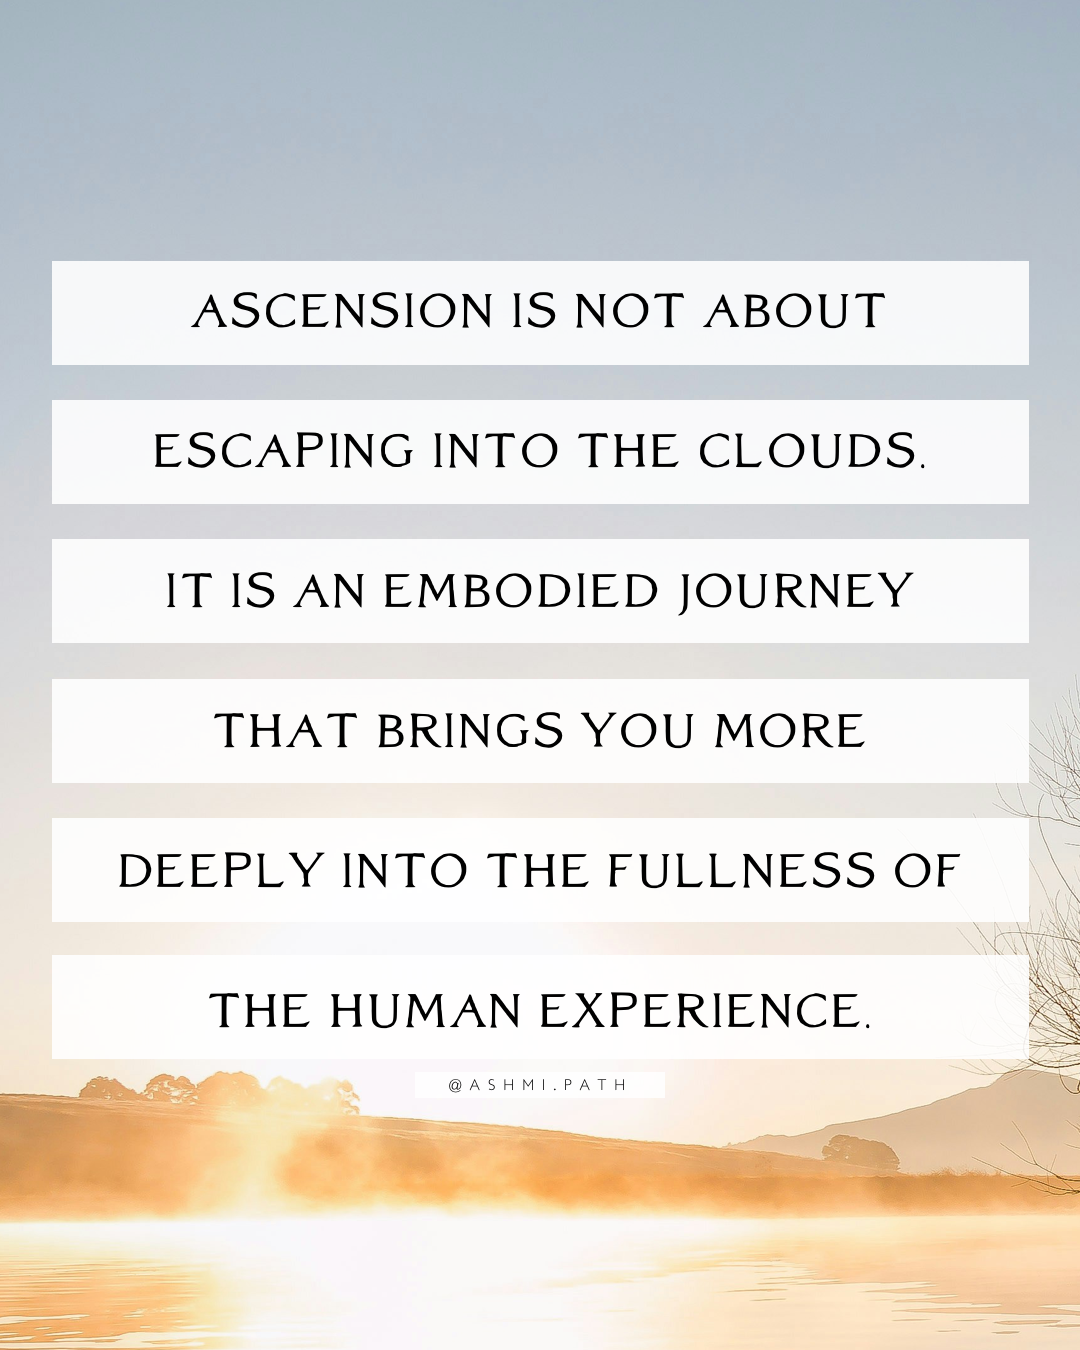 You are not Ascending to Escape Your Humanity (+Upcoming Ceremony)